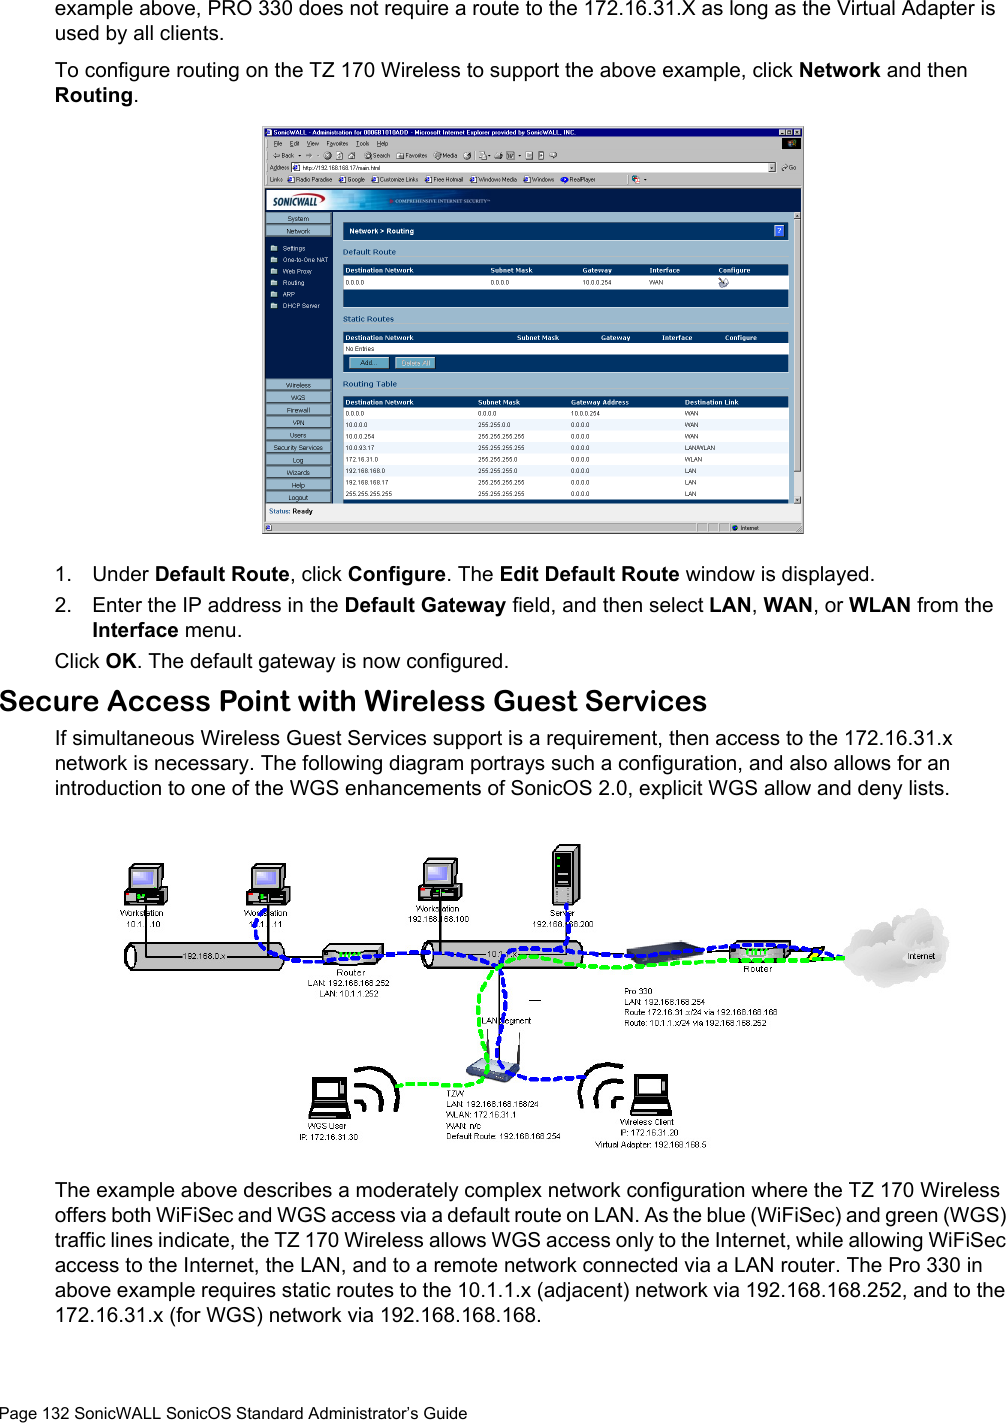 Page 132 SonicWALL SonicOS Standard Administrator’s Guideexample above, PRO 330 does not require a route to the 172.16.31.X as long as the Virtual Adapter is used by all clients. To configure routing on the TZ 170 Wireless to support the above example, click Network and then Routing.1. Under Default Route, click Configure. The Edit Default Route window is displayed. 2. Enter the IP address in the Default Gateway field, and then select LAN, WAN, or WLAN from the Interface menu. Click OK. The default gateway is now configured. Secure Access Point with Wireless Guest ServicesIf simultaneous Wireless Guest Services support is a requirement, then access to the 172.16.31.x network is necessary. The following diagram portrays such a configuration, and also allows for an introduction to one of the WGS enhancements of SonicOS 2.0, explicit WGS allow and deny lists.The example above describes a moderately complex network configuration where the TZ 170 Wireless offers both WiFiSec and WGS access via a default route on LAN. As the blue (WiFiSec) and green (WGS) traffic lines indicate, the TZ 170 Wireless allows WGS access only to the Internet, while allowing WiFiSec access to the Internet, the LAN, and to a remote network connected via a LAN router. The Pro 330 in above example requires static routes to the 10.1.1.x (adjacent) network via 192.168.168.252, and to the 172.16.31.x (for WGS) network via 192.168.168.168.